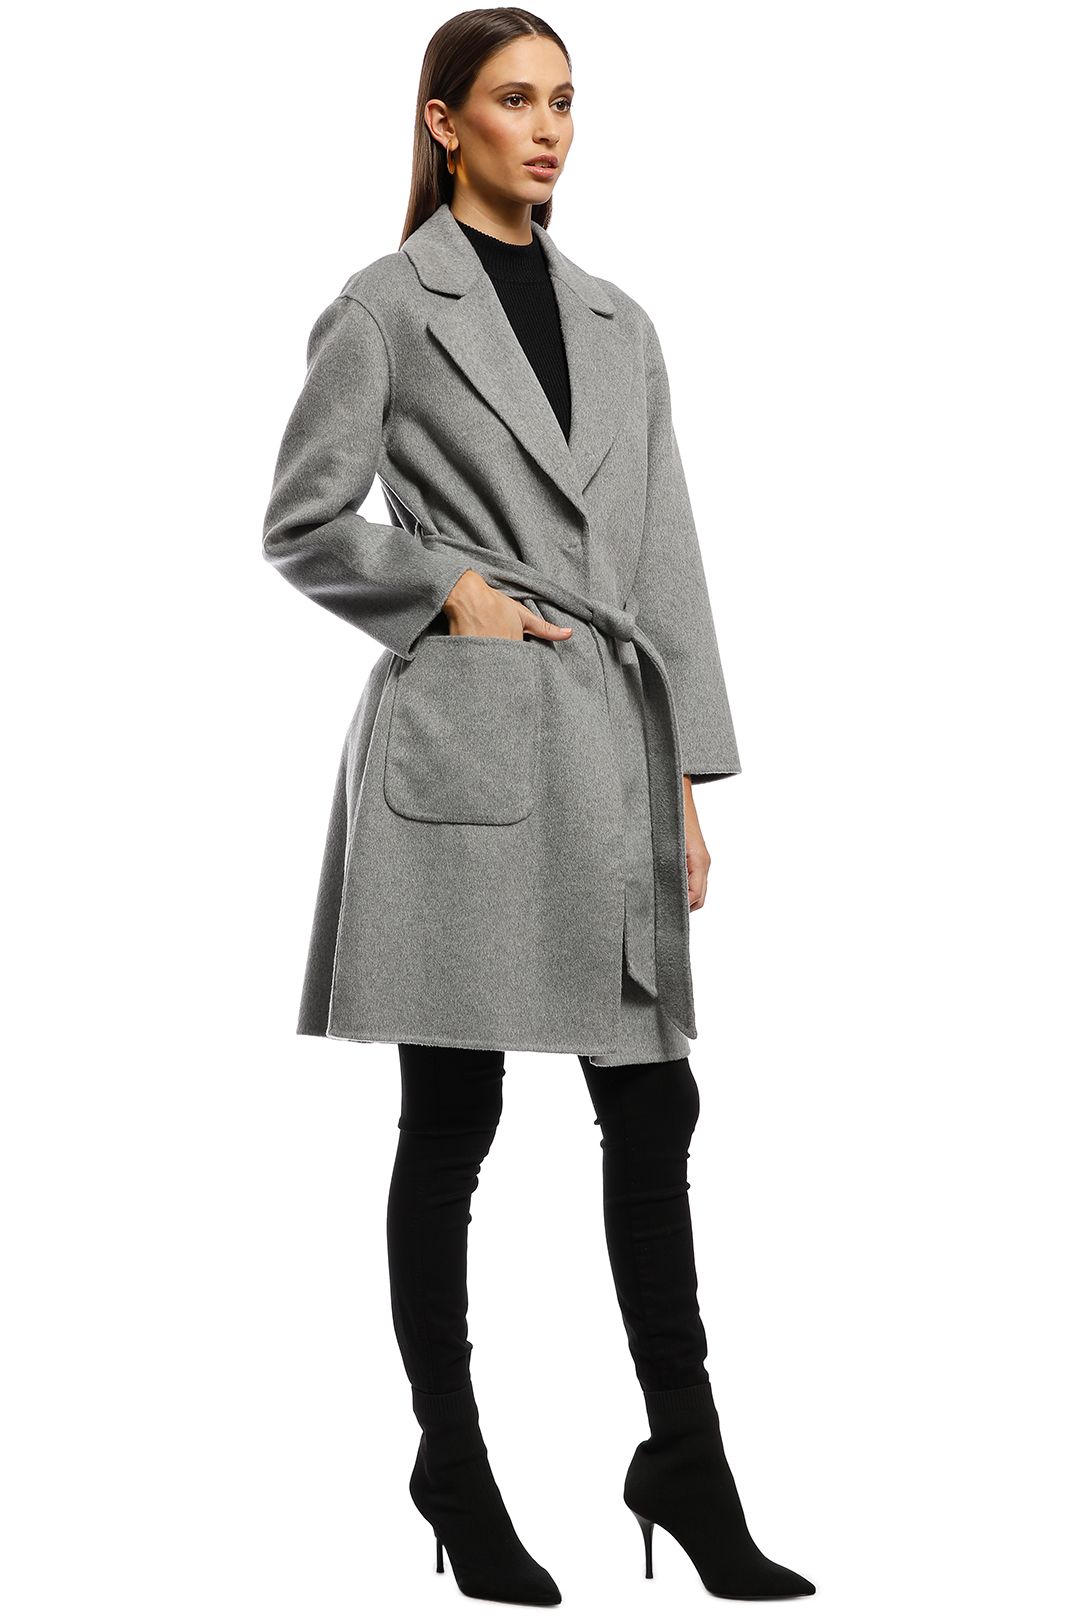 Rodeo Show - Chicago Coat - Light Grey - Side